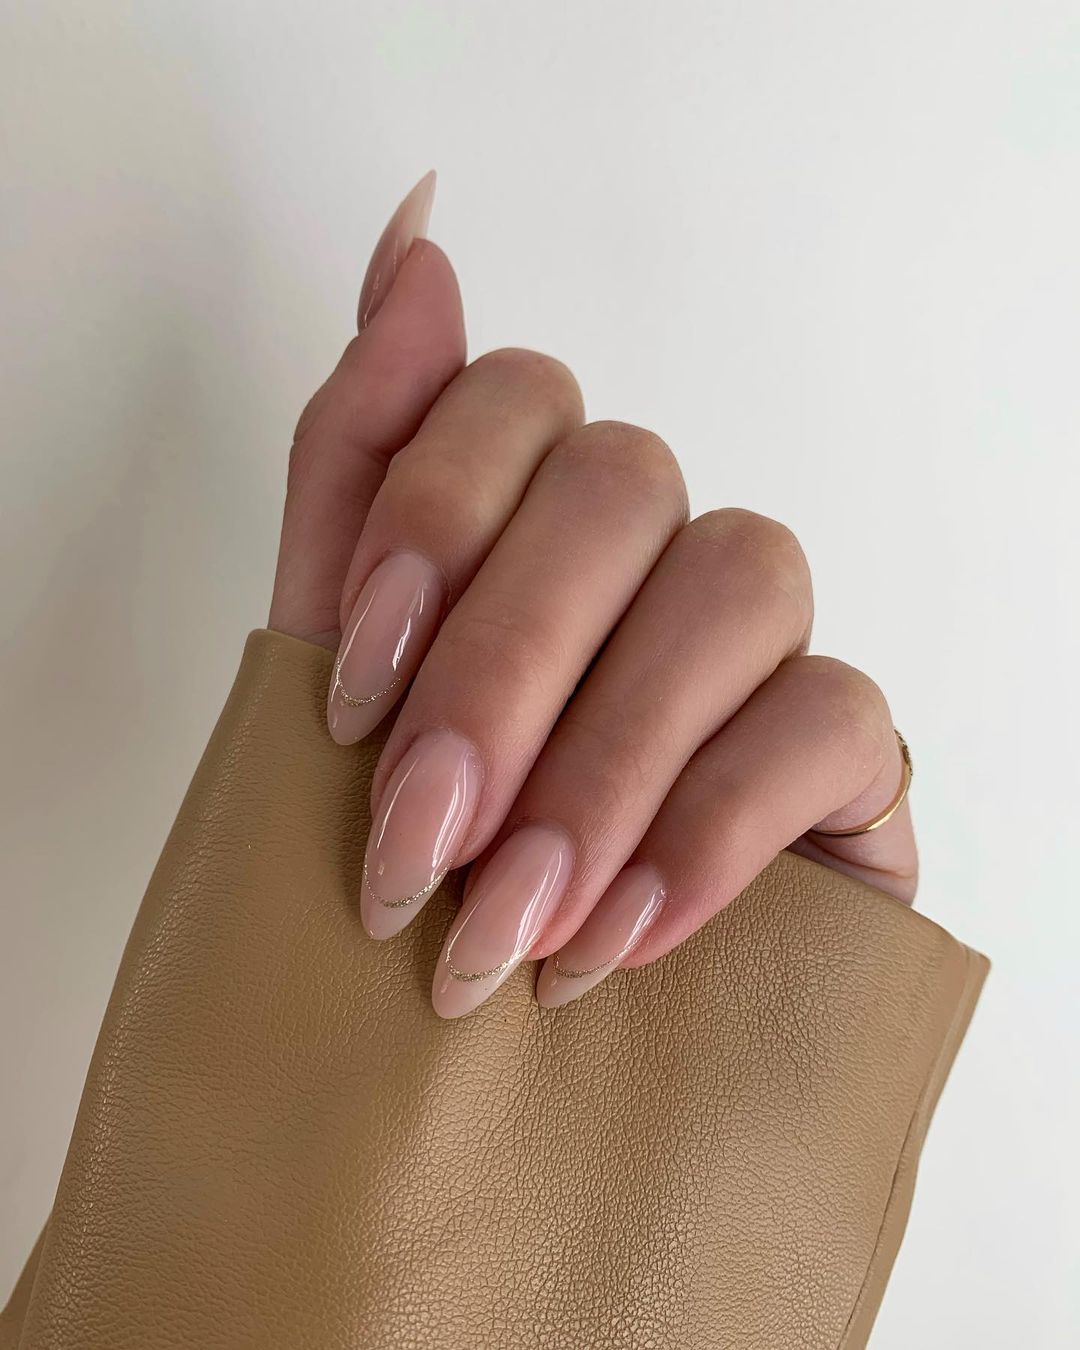 25 Trending Summer Nail Colors And Designs For 2021 images 15